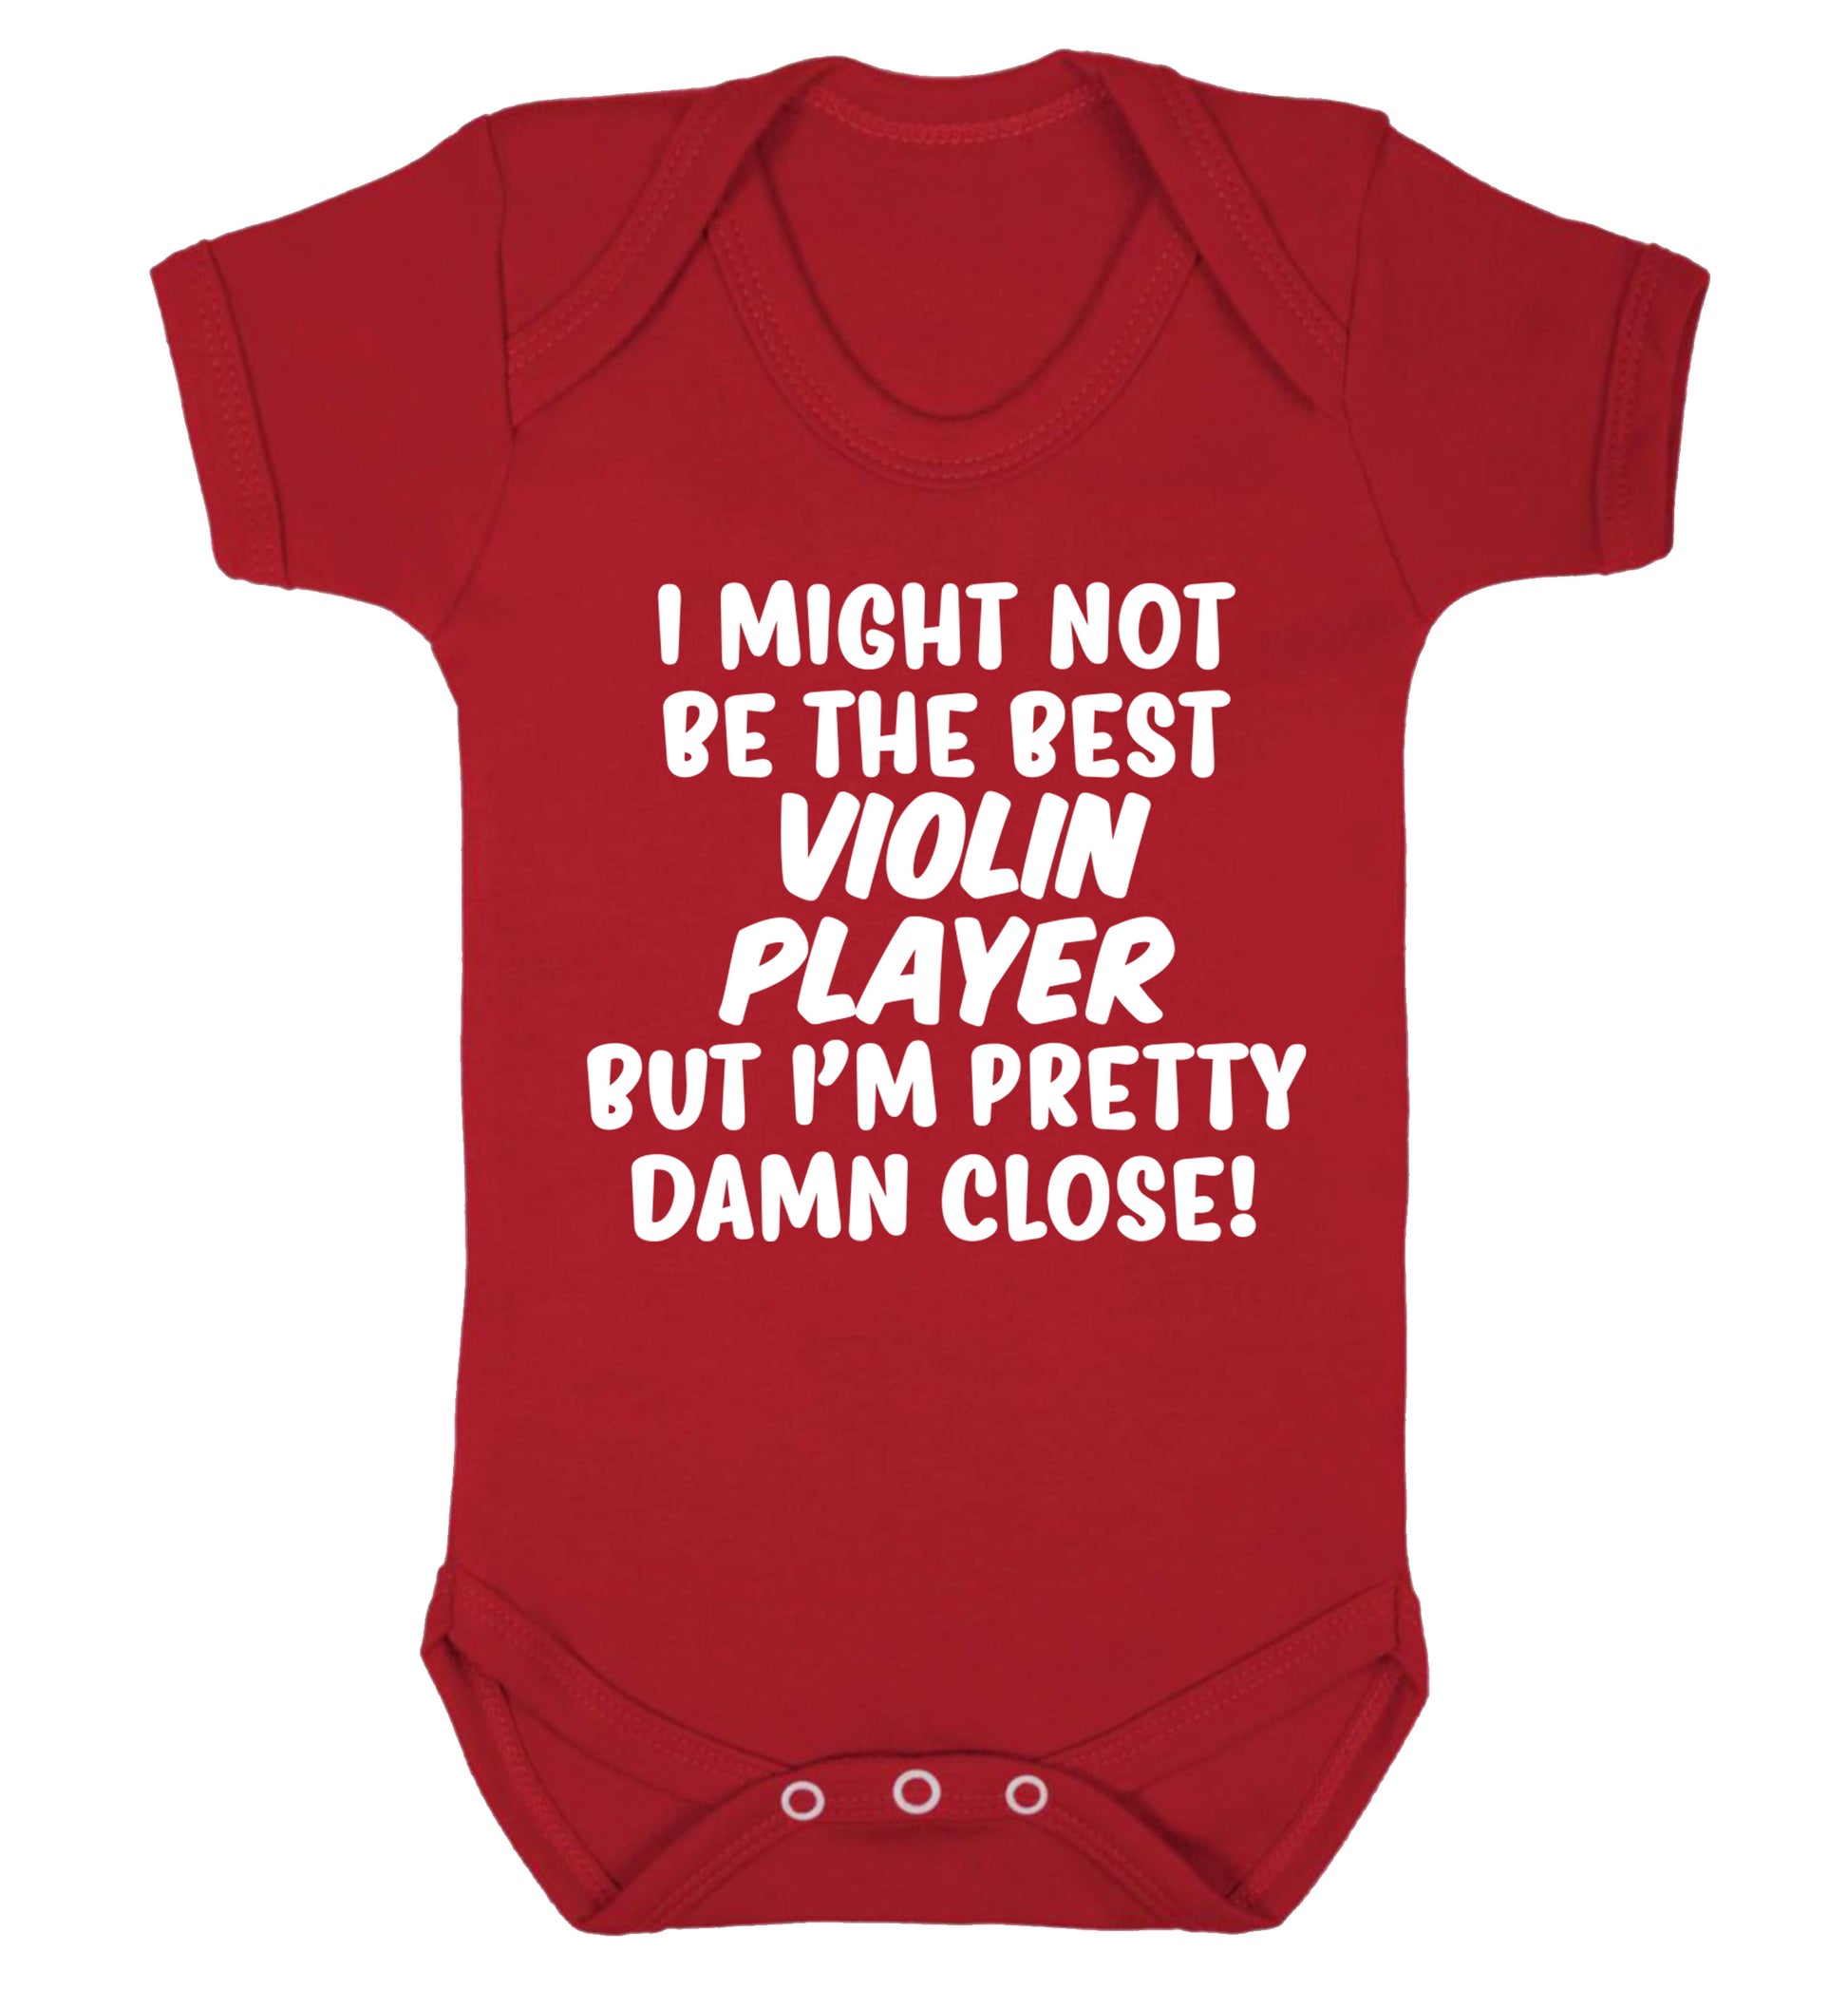 I might not be the best violin player but I'm pretty close Baby Vest red 18-24 months